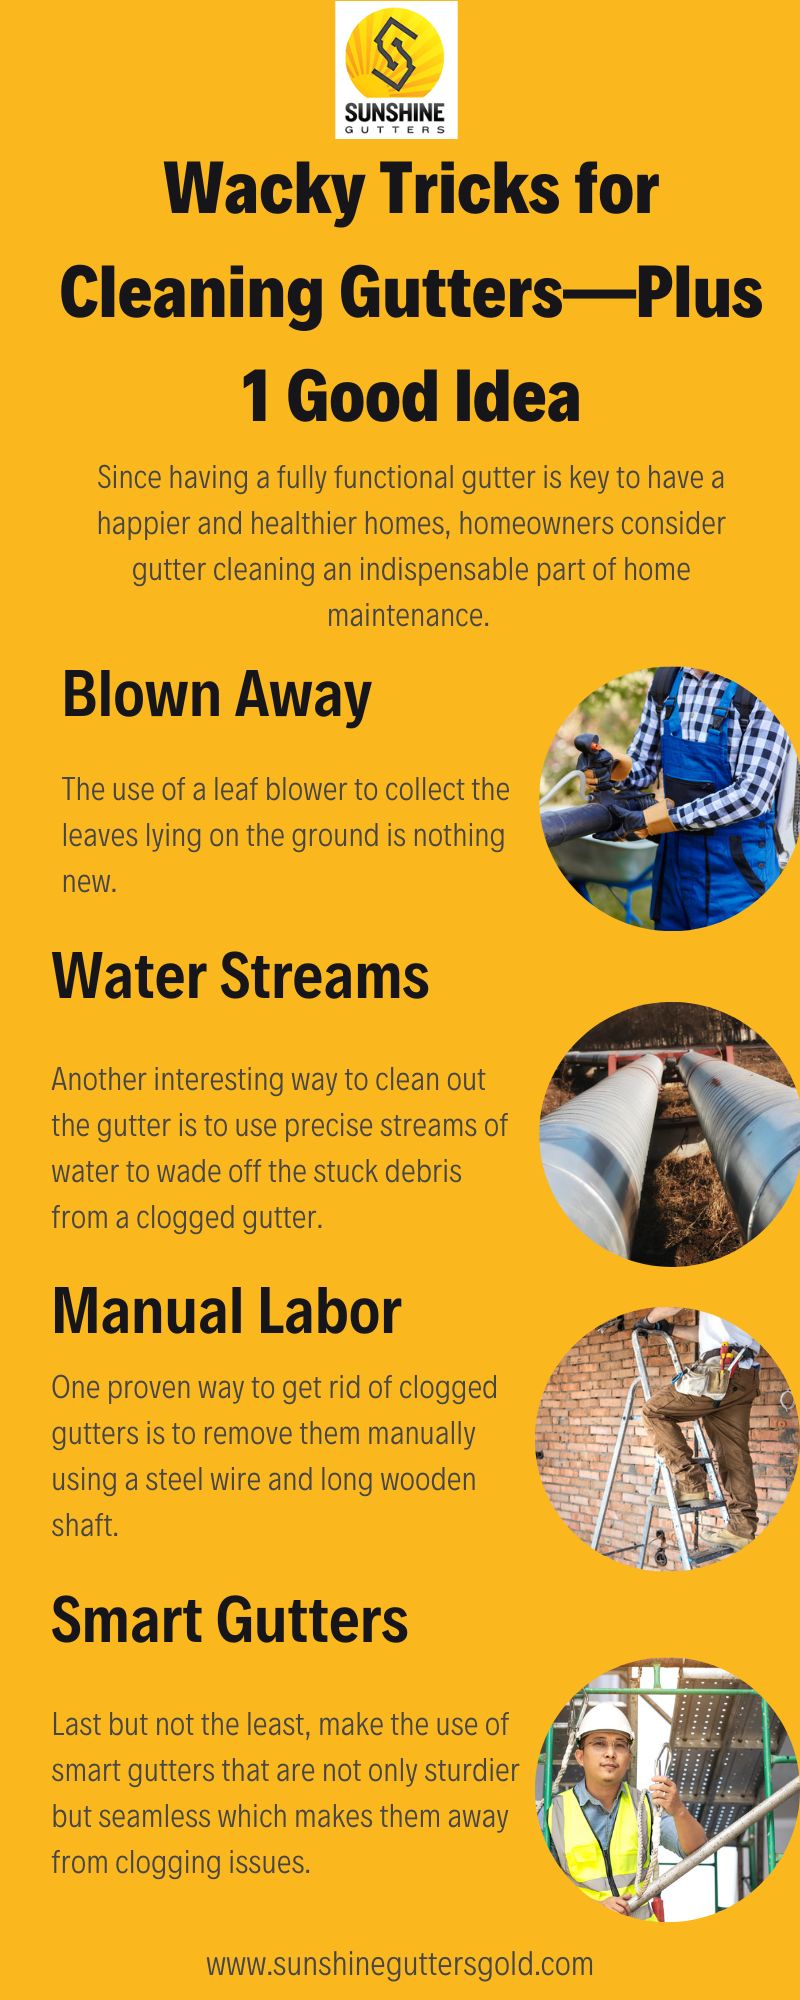 Wacky Tricks for Cleaning Gutters—Plus 1 Good Idea